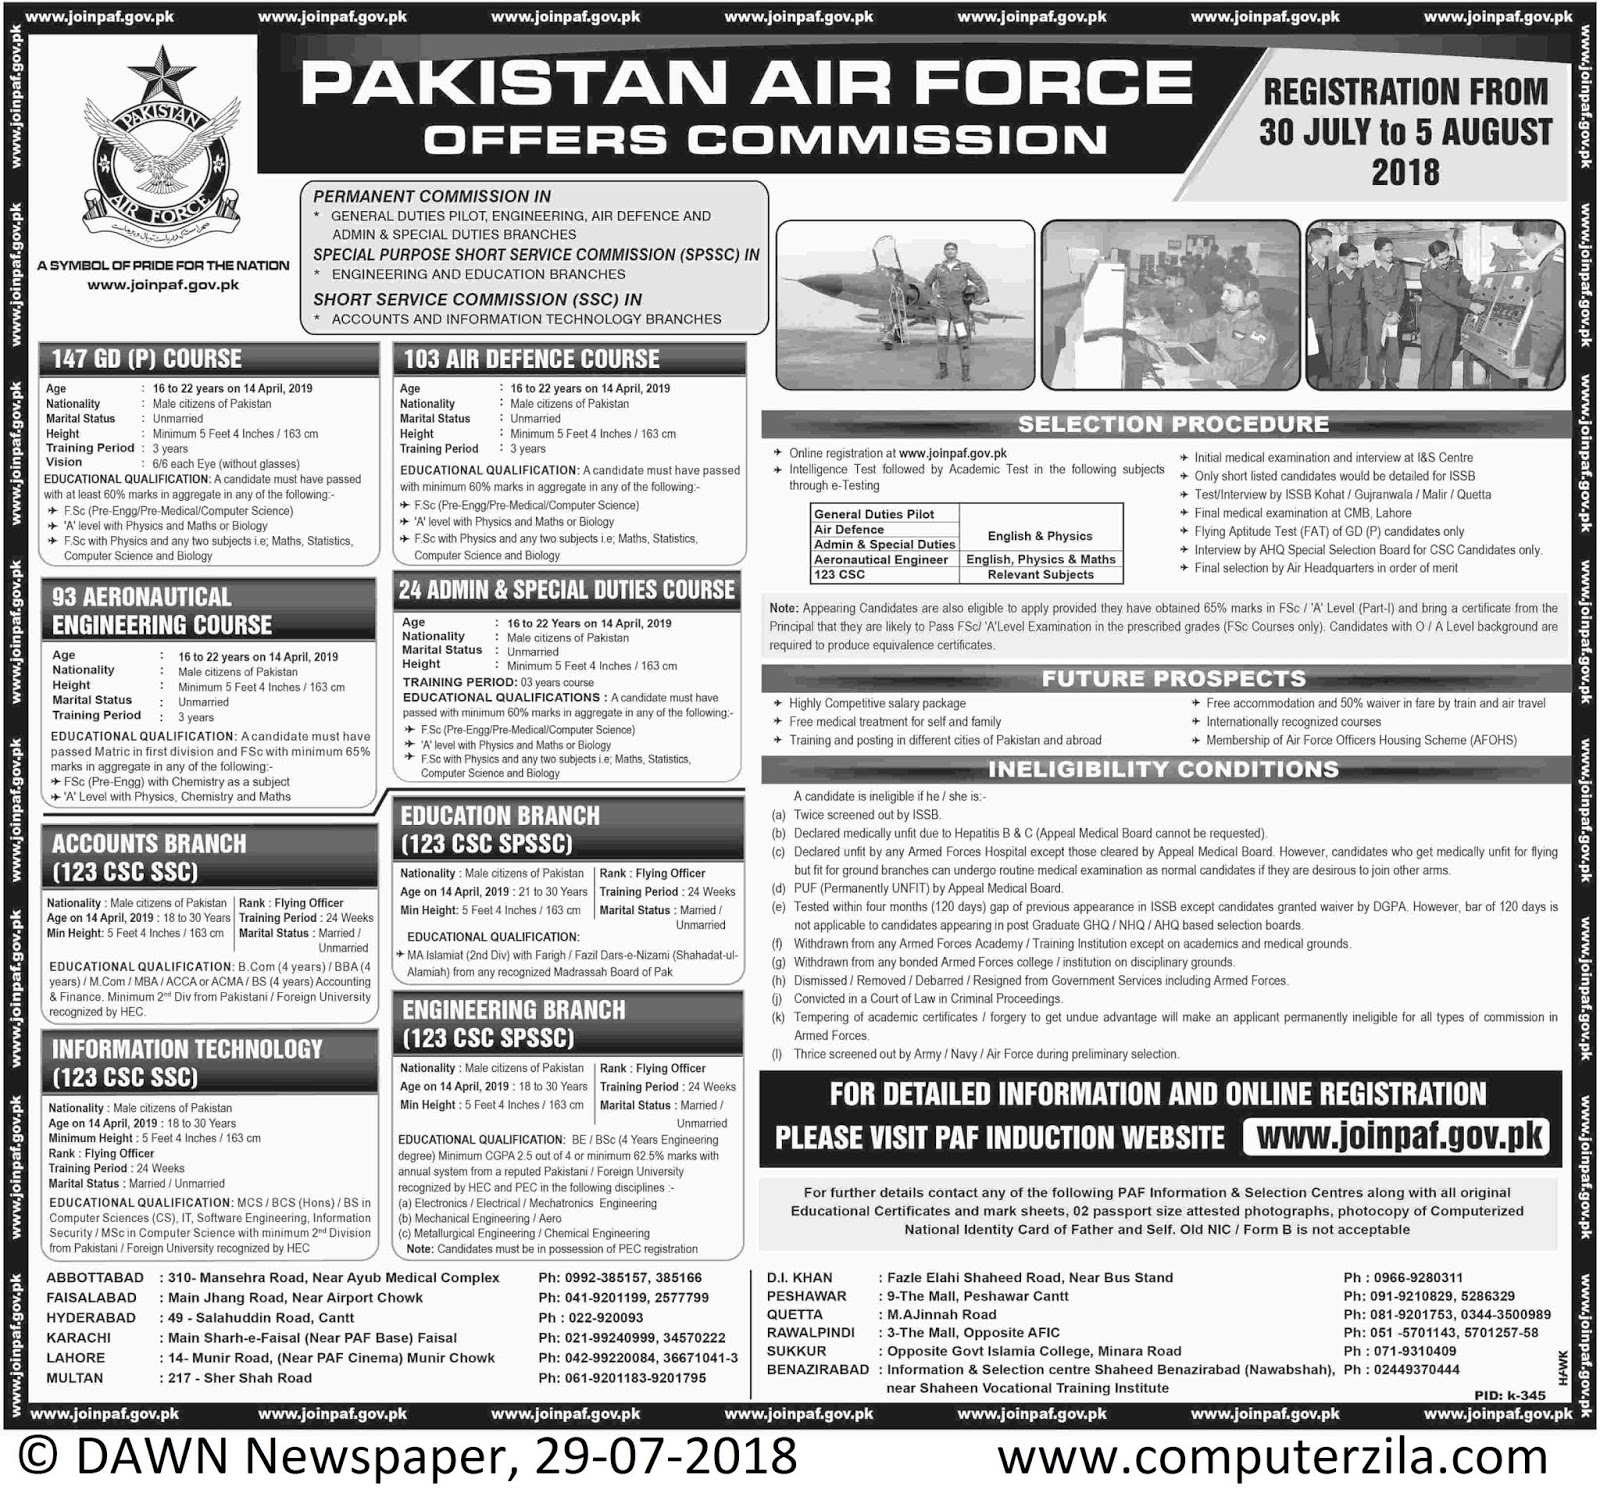 PAF Offers Commission at Pakistan Air Force